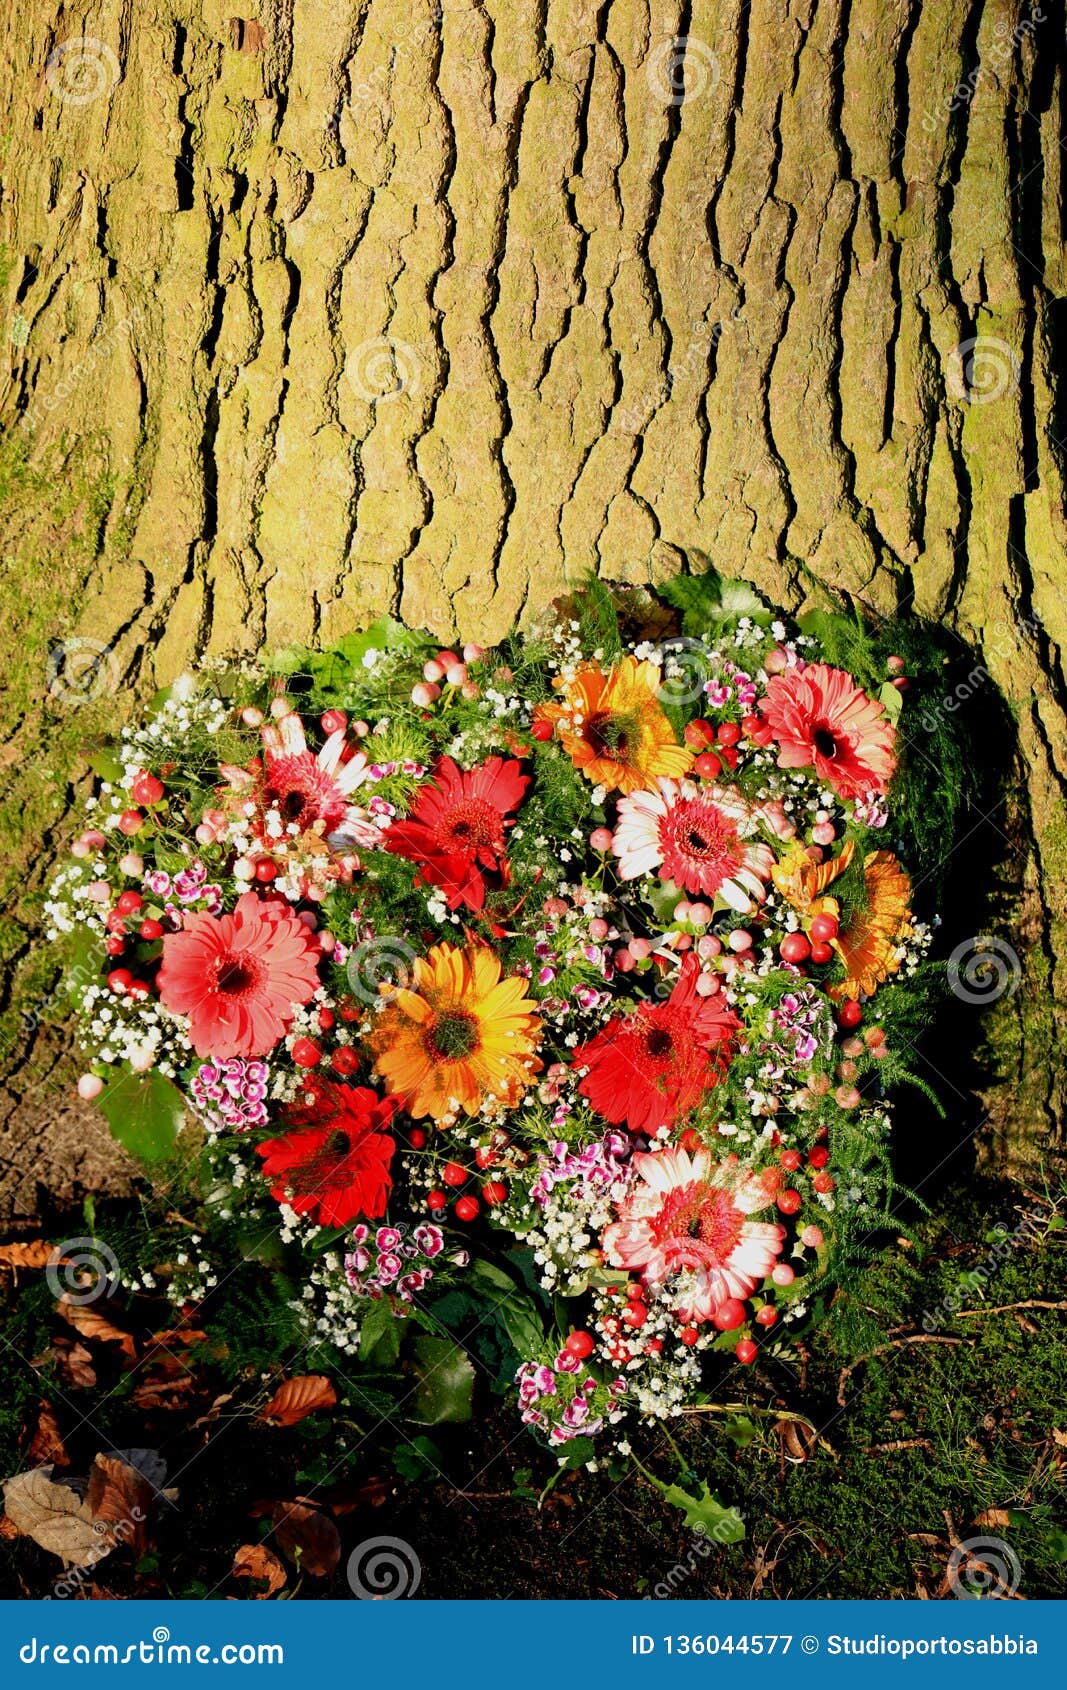 Sympathy Flowers Near A Tree Stock Image - Image of grave ...